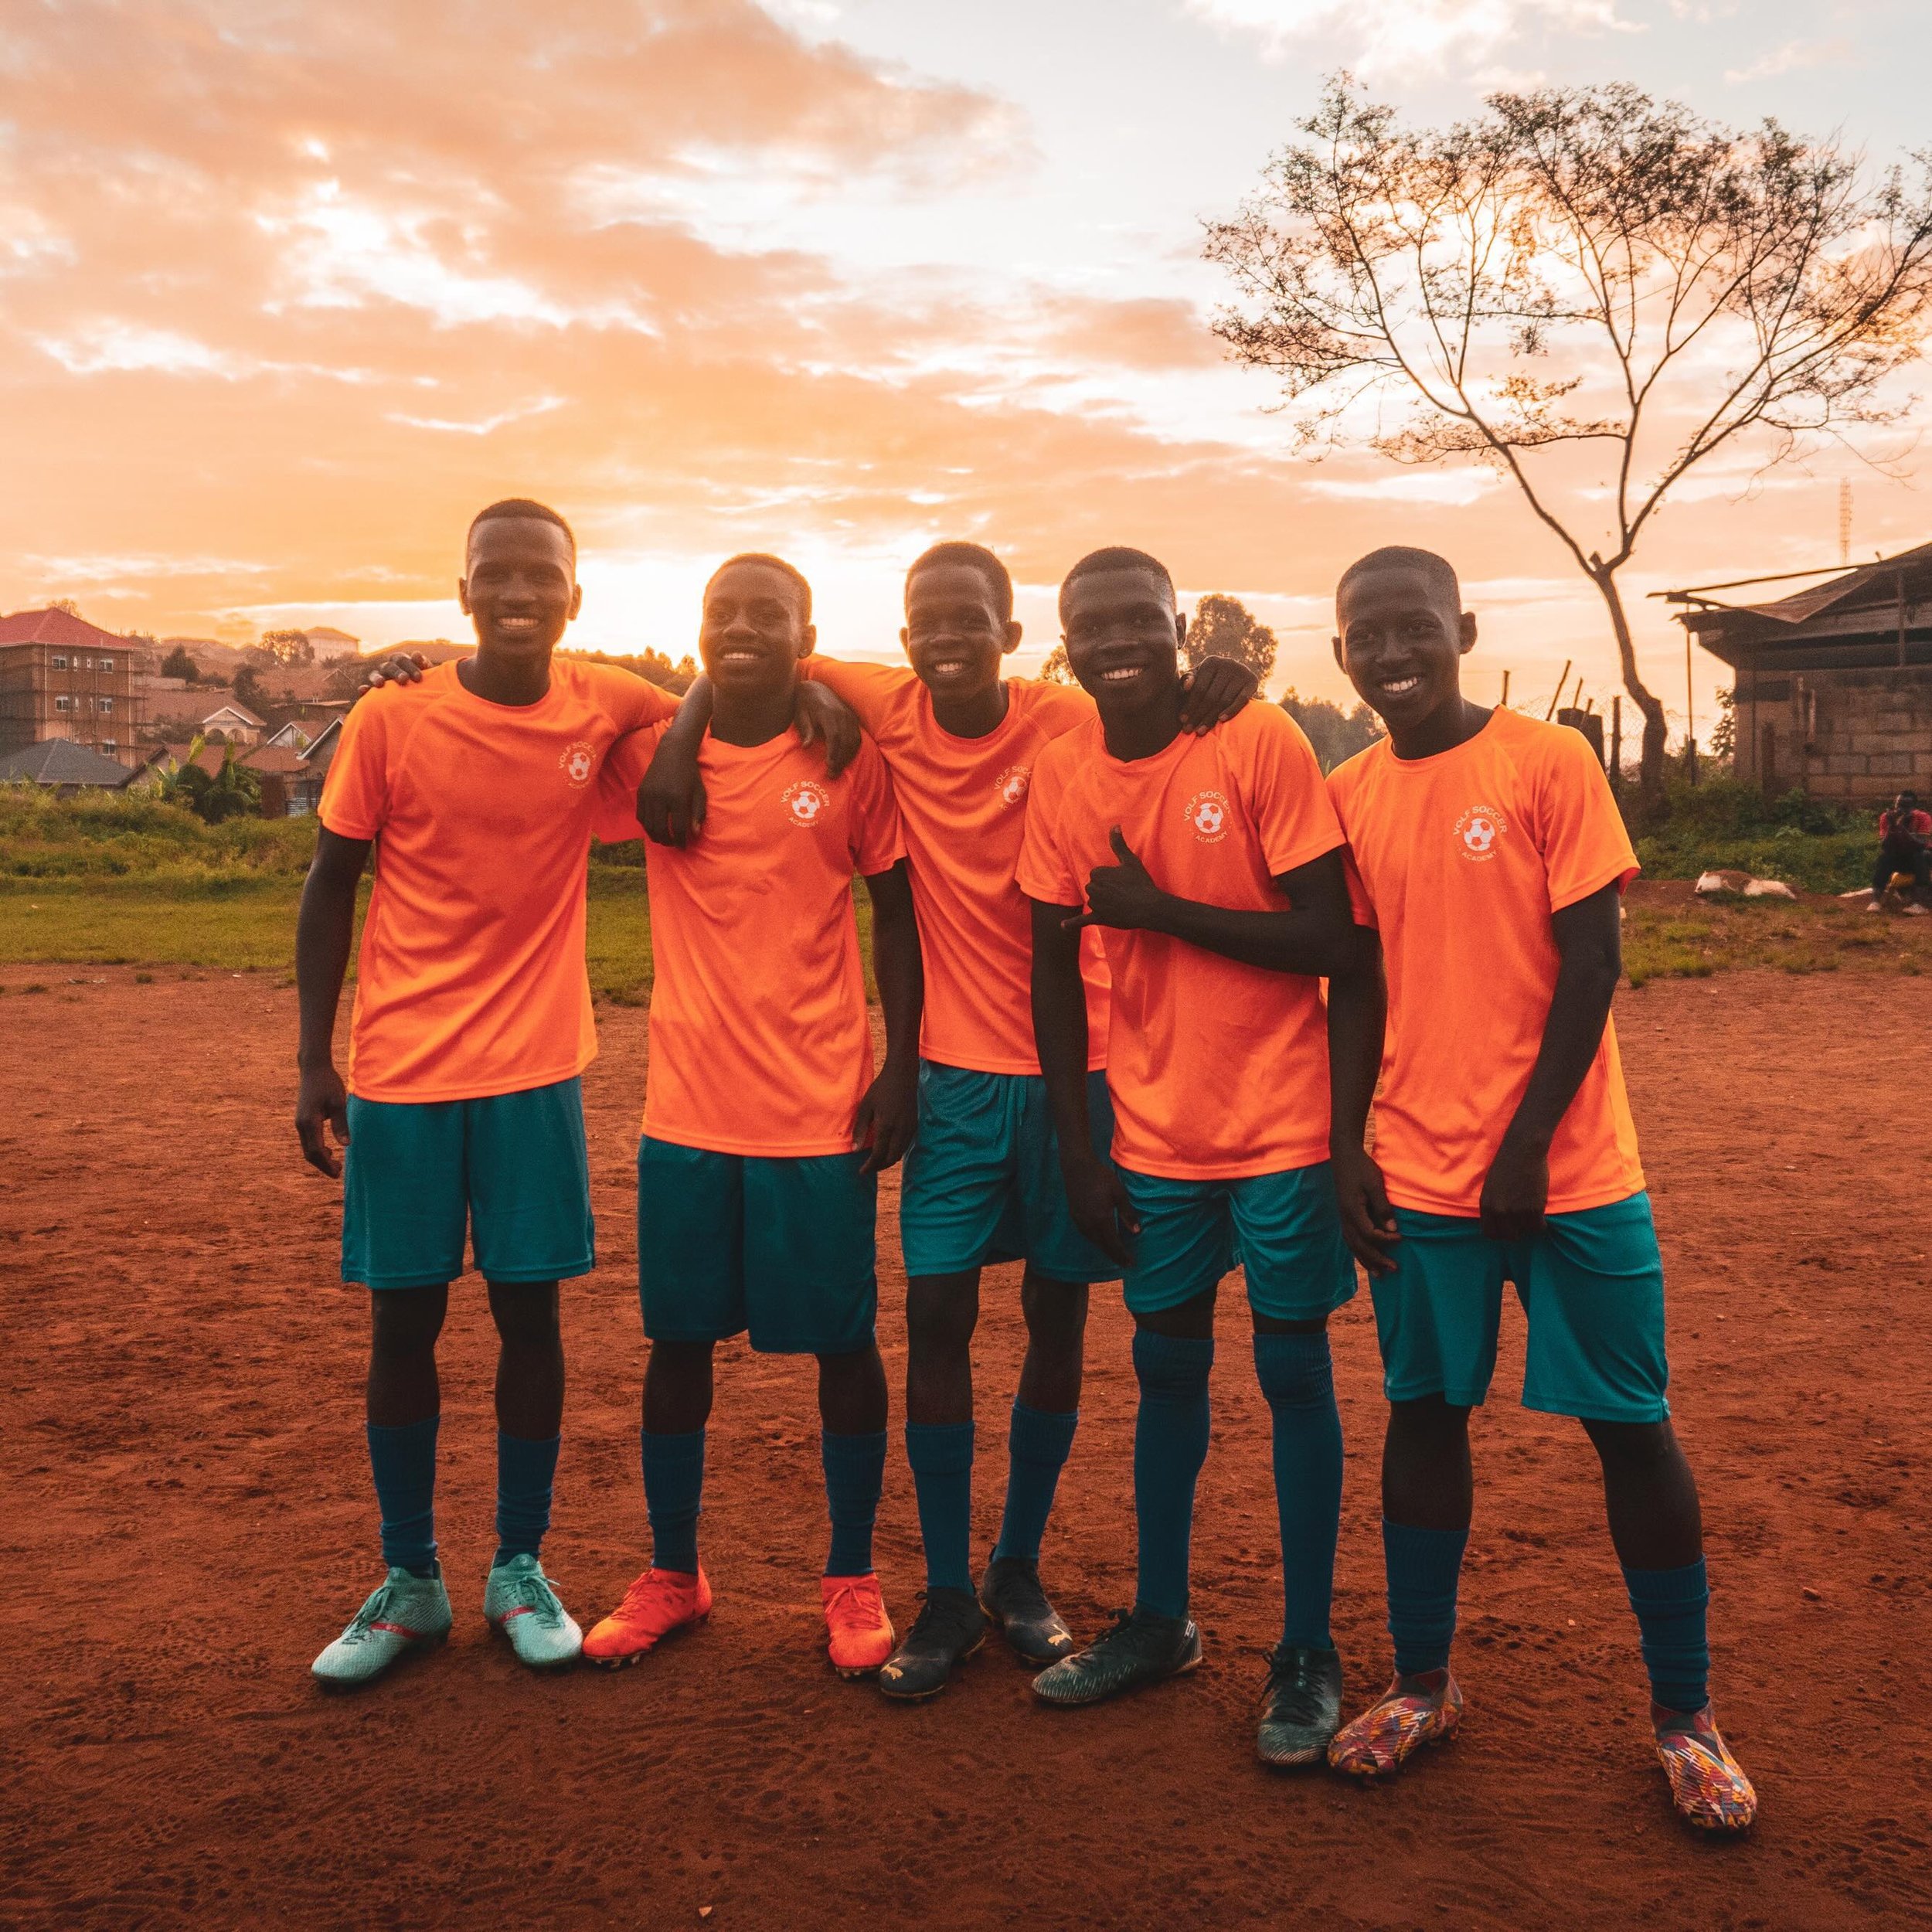 Sweat, laughter, and endless fun &ndash; that&rsquo;s what soccer with friends is all about! Our boys in Kampala after the training ☀️ 🇺🇬🧡💙 #morevolf #moreskills 
.
.
#volfsocceracademy #volfsoccer #volf #volfsocceracademyuganda #vsa #uganda #afr